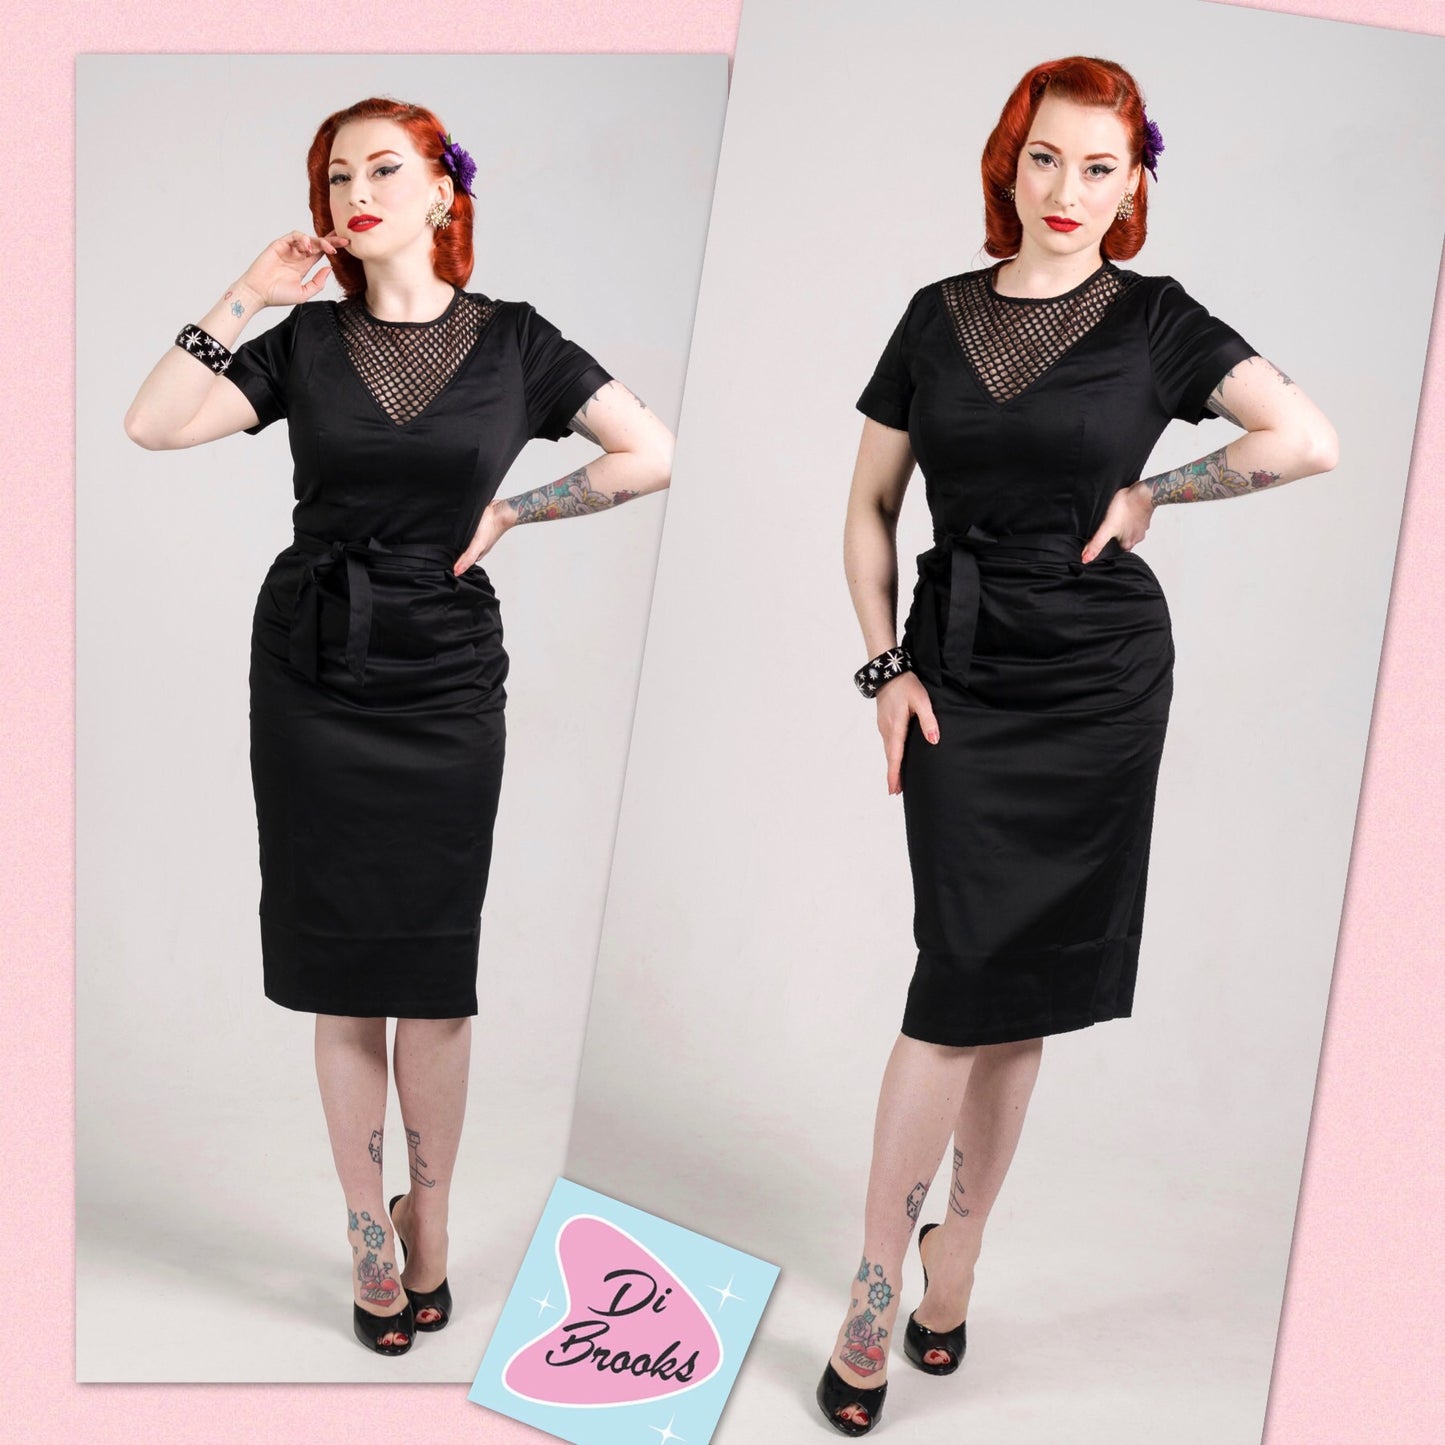 Vintage 1950s style black wiggle dress with fishnet panel XS to 3XL